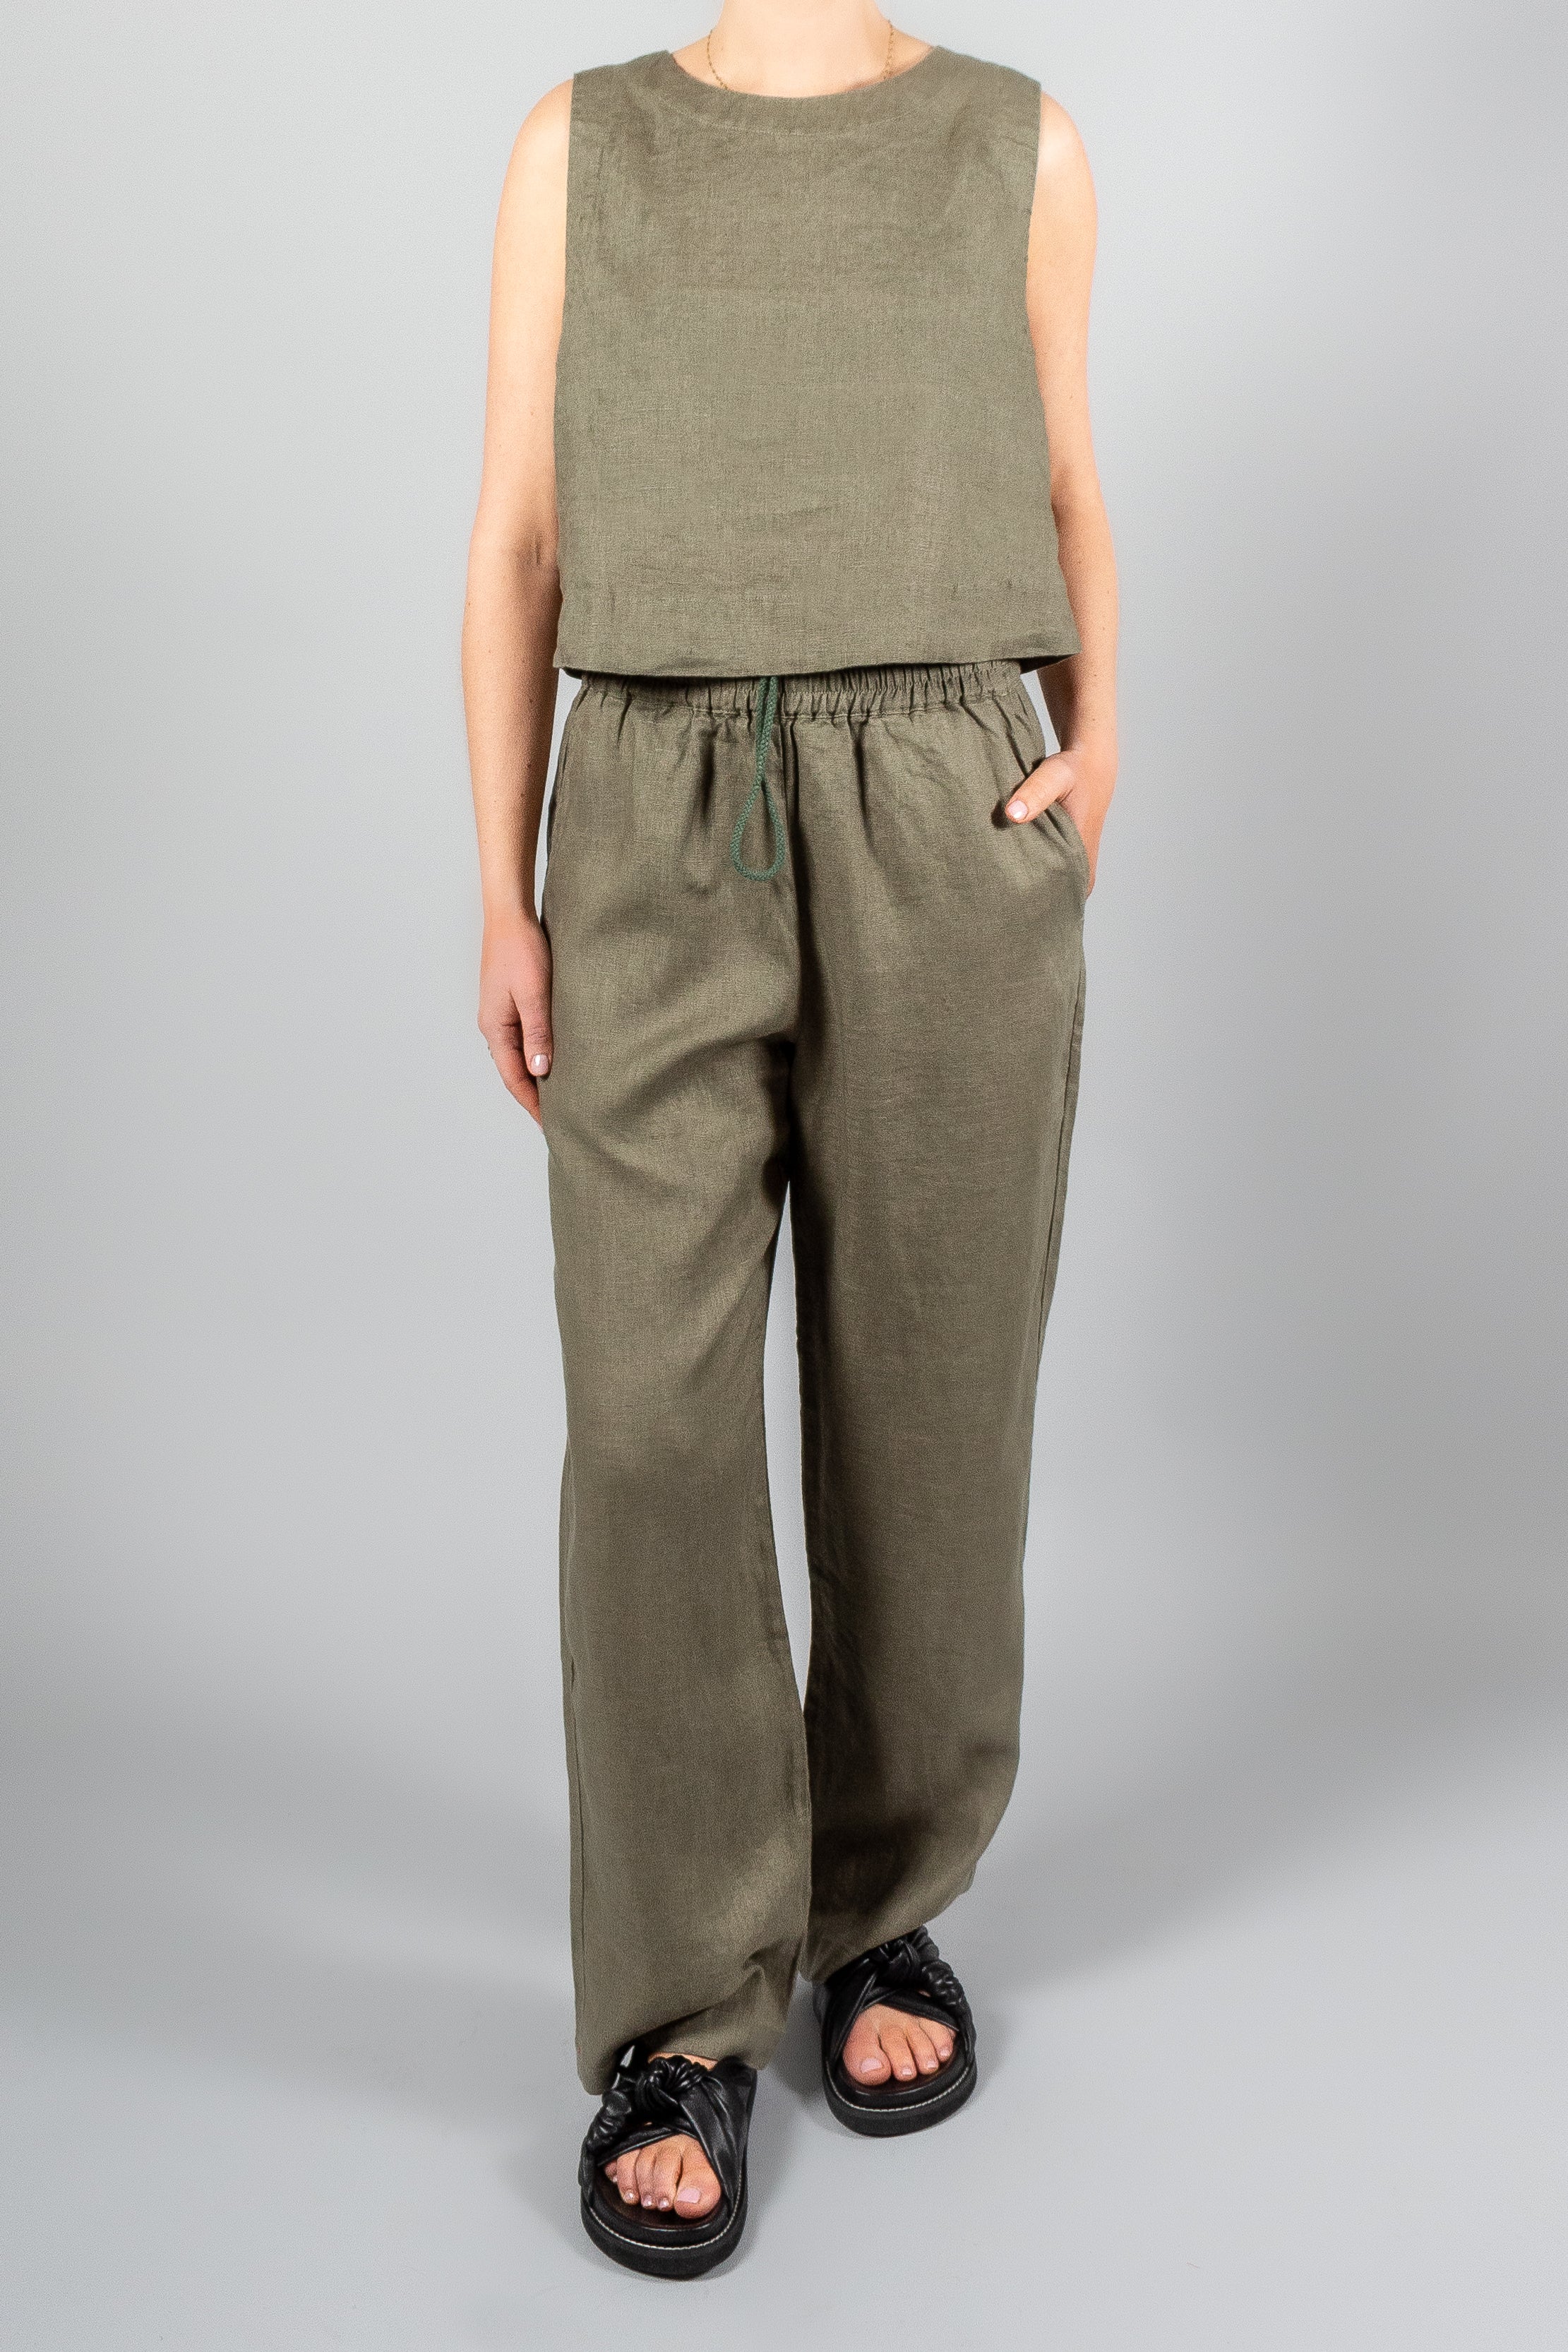 Xirena Atticus Pant-Pants and Shorts-Misch-Boutique-Vancouver-Canada-misch.ca